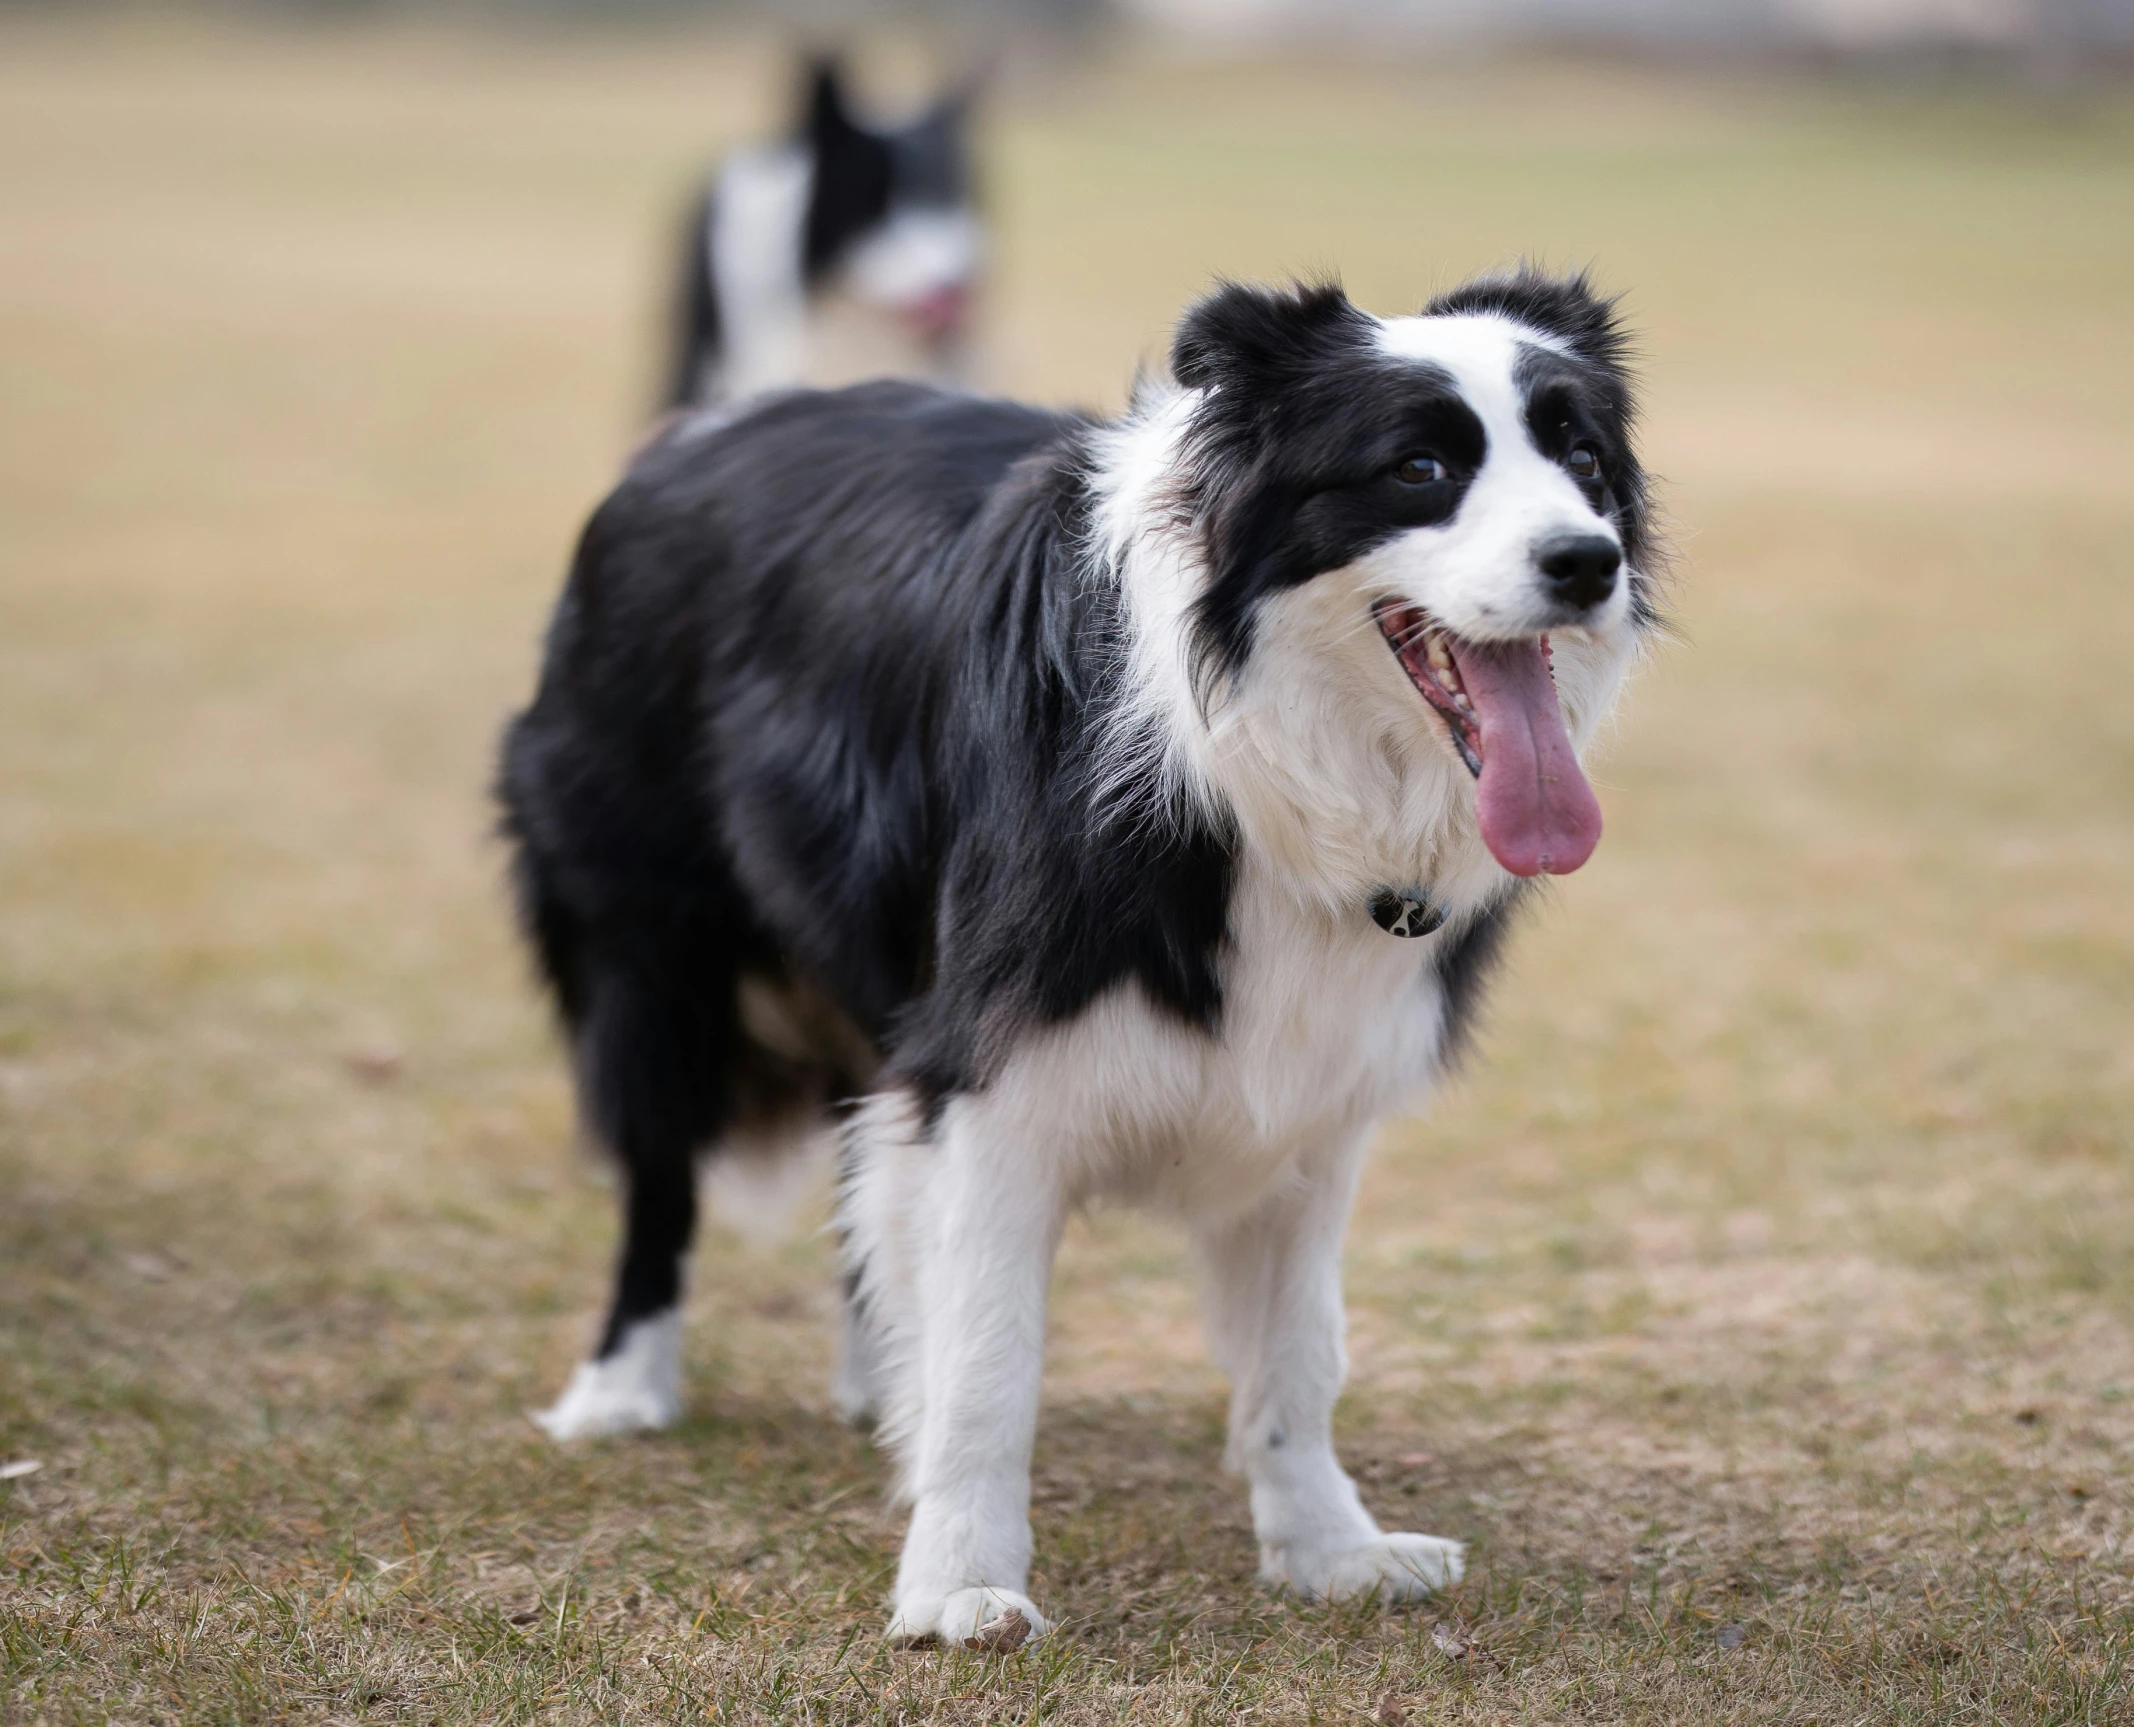 a black and white dog is on a field with another dog in the background